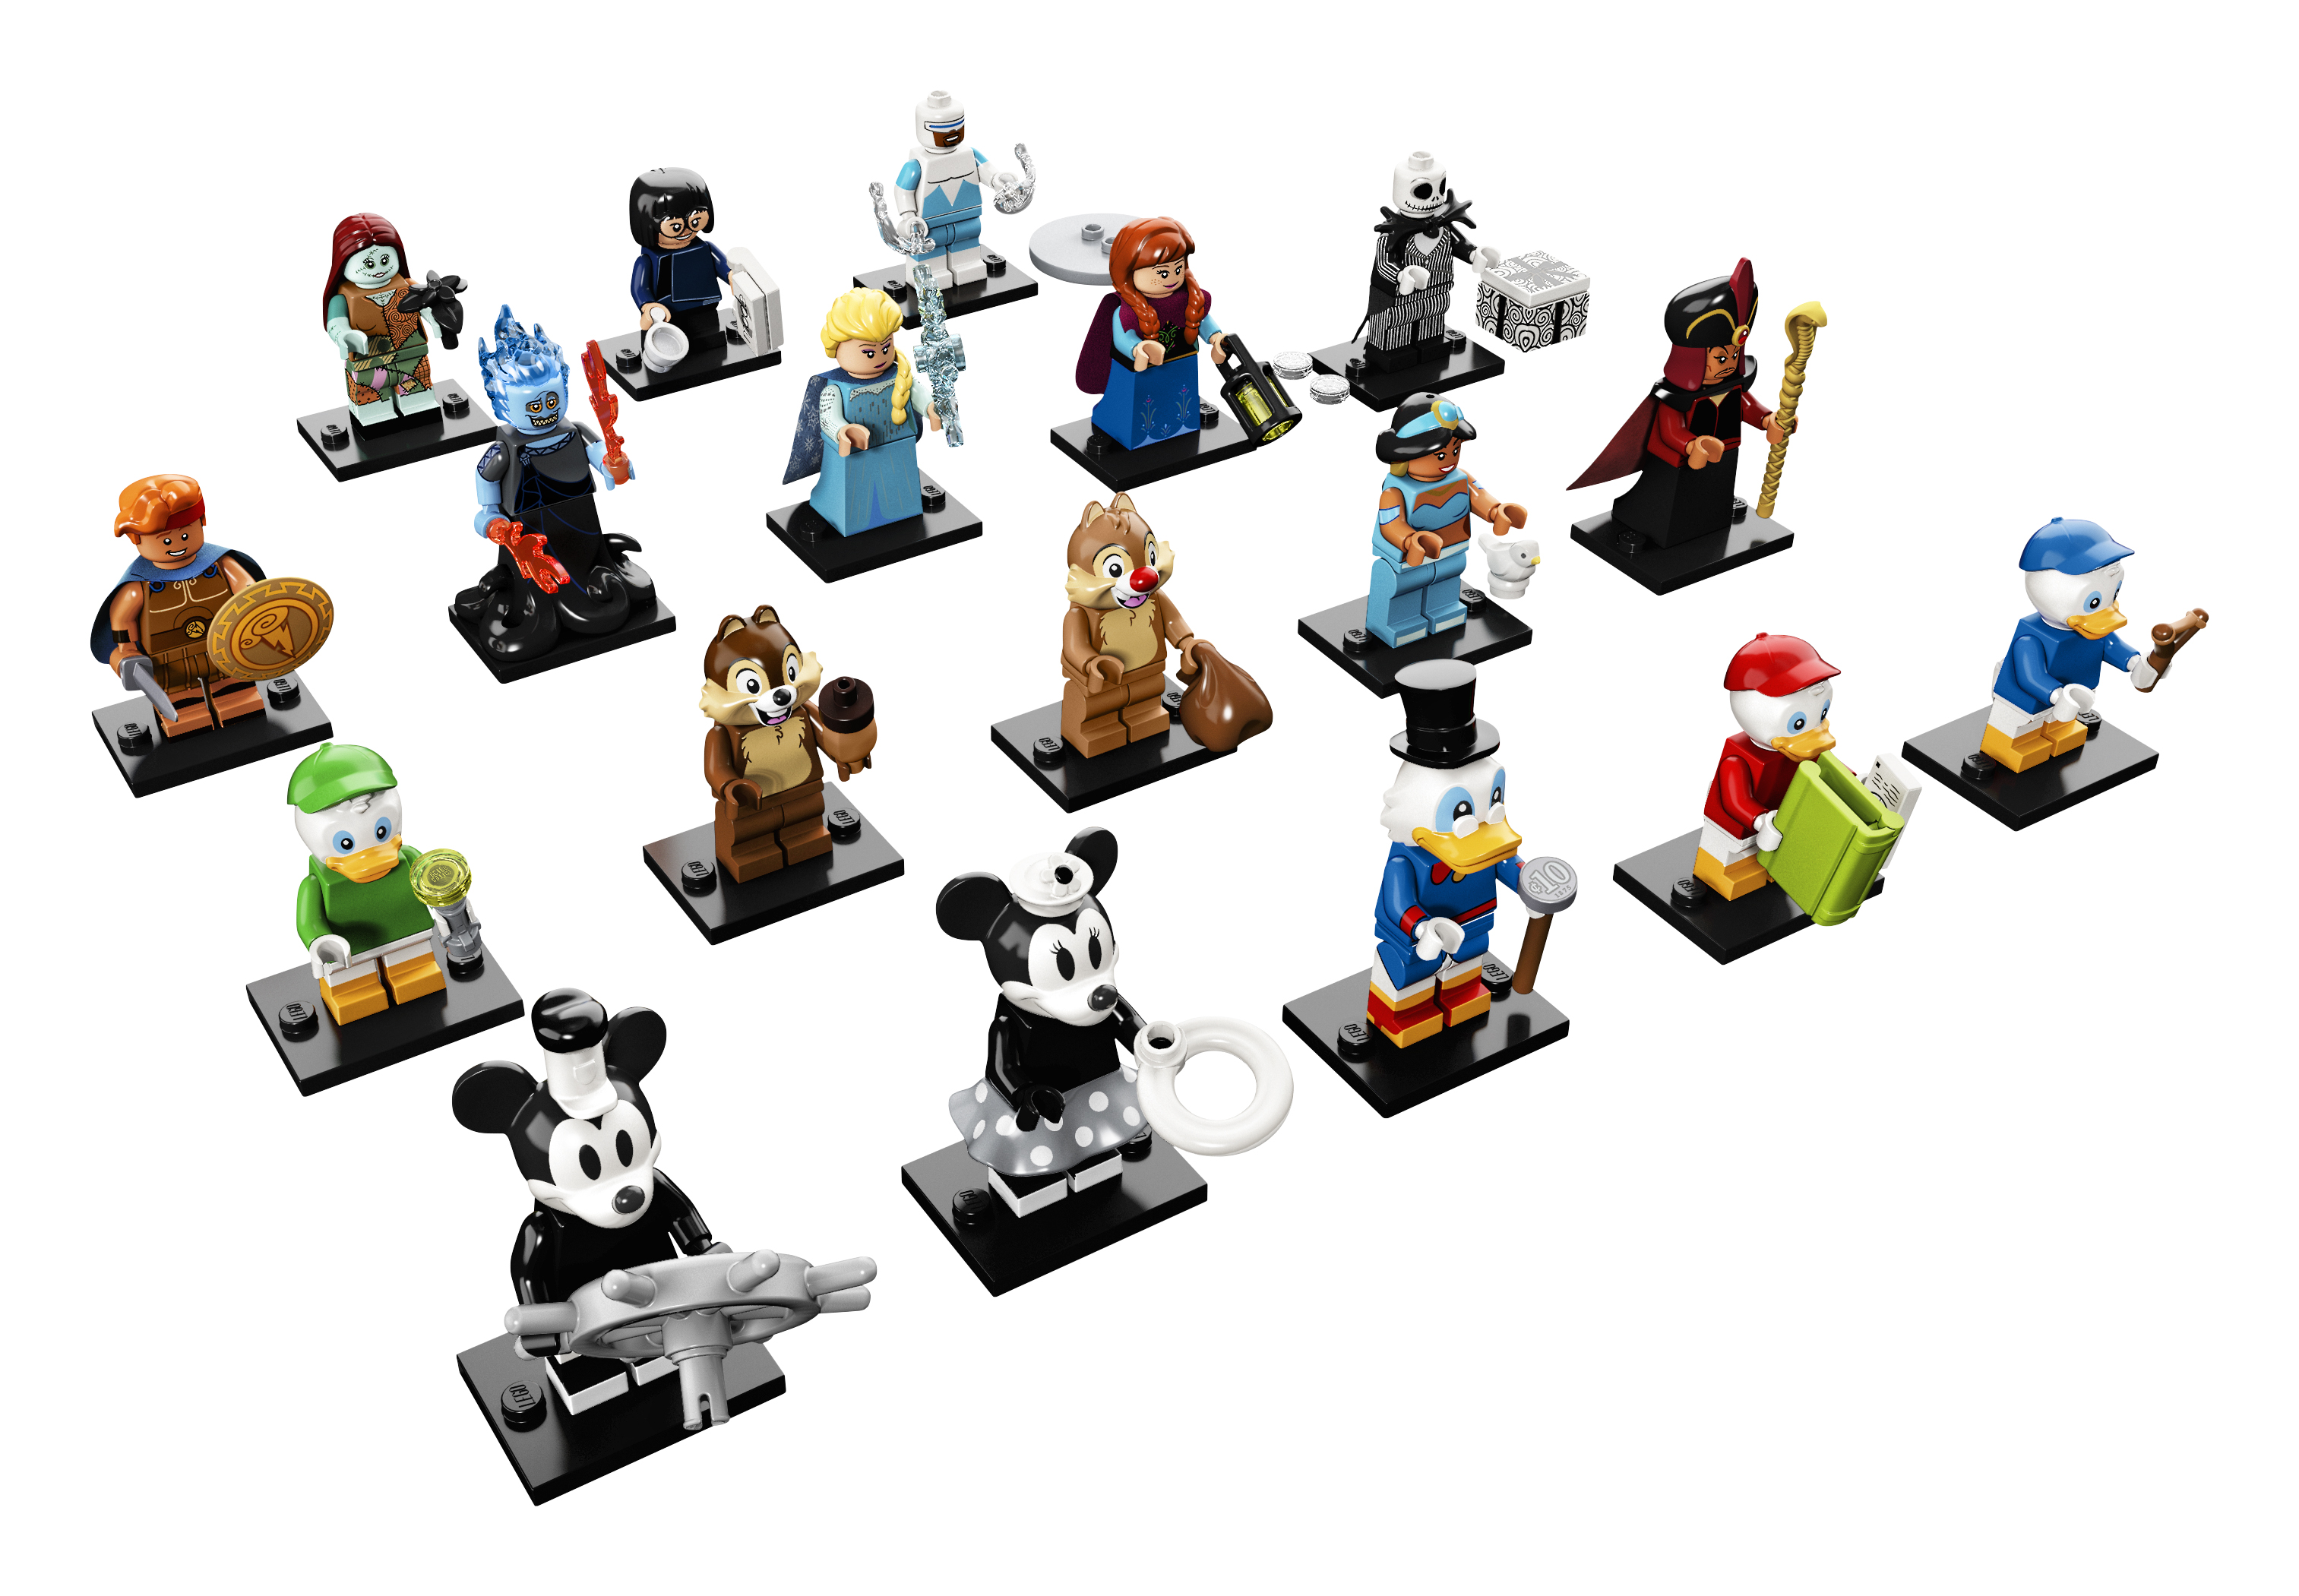 NEW! Disney LEGO Minifigure Collection to be Launched May 1